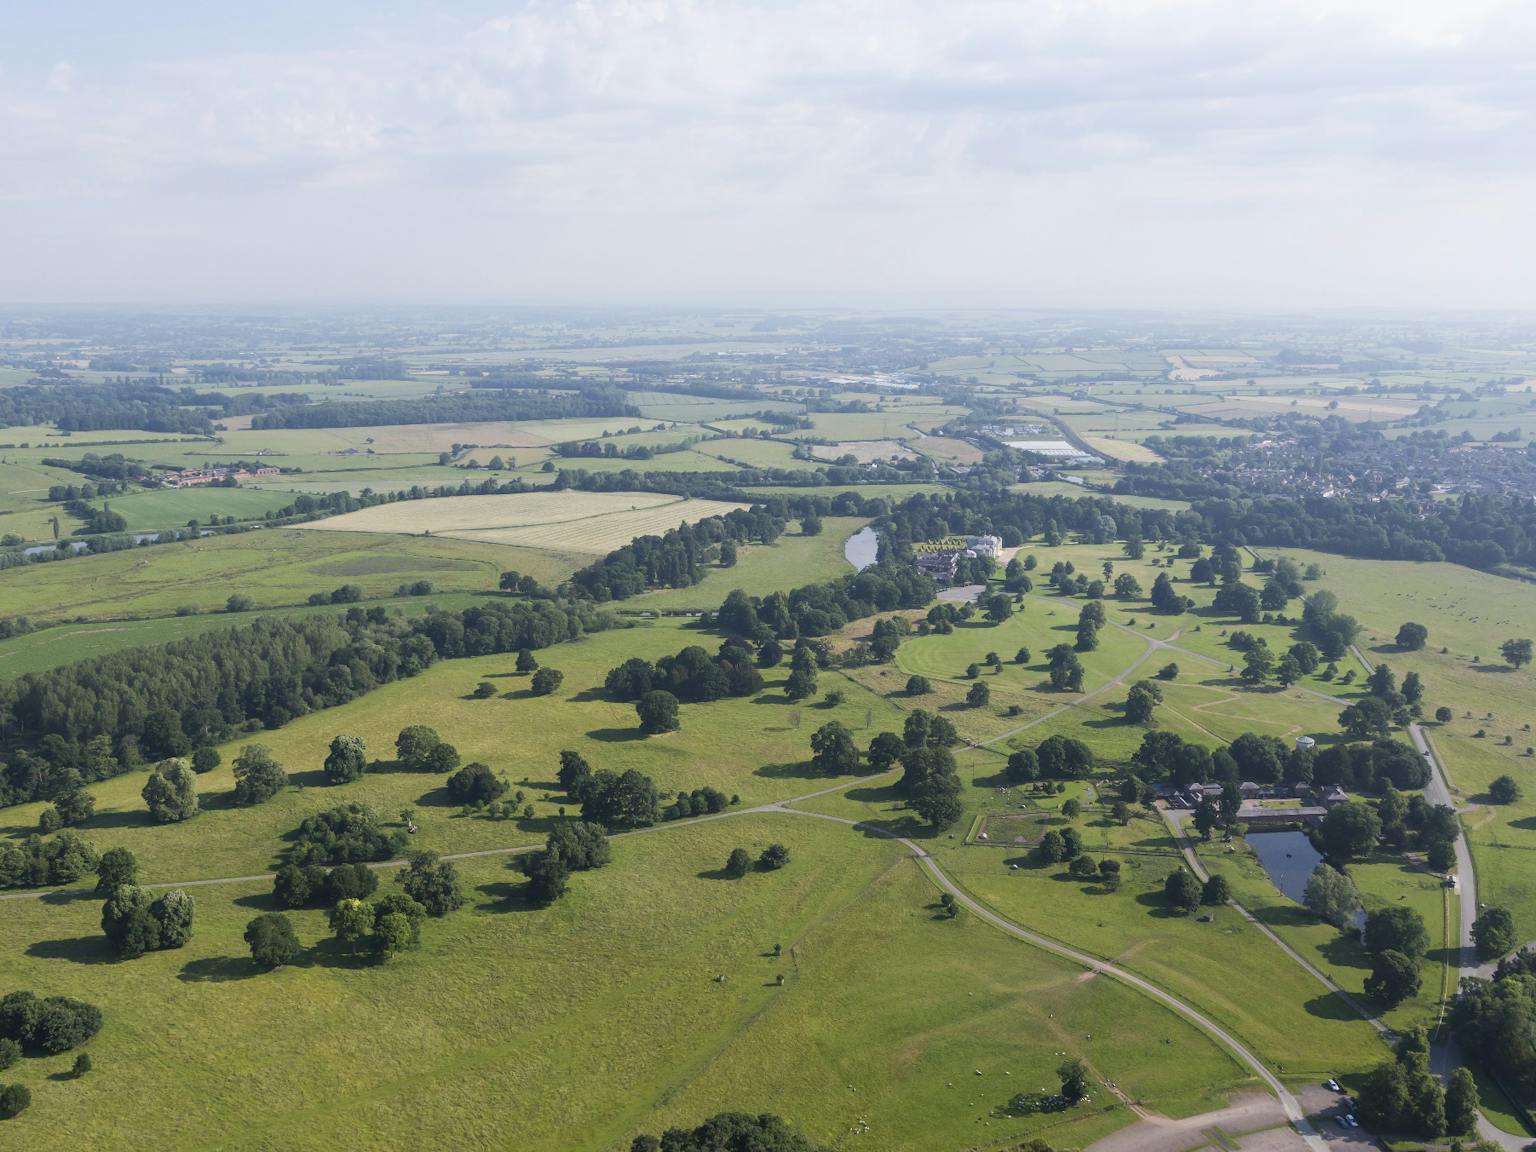 Aerial photo of green flat landscape with trees, roads and patches of water